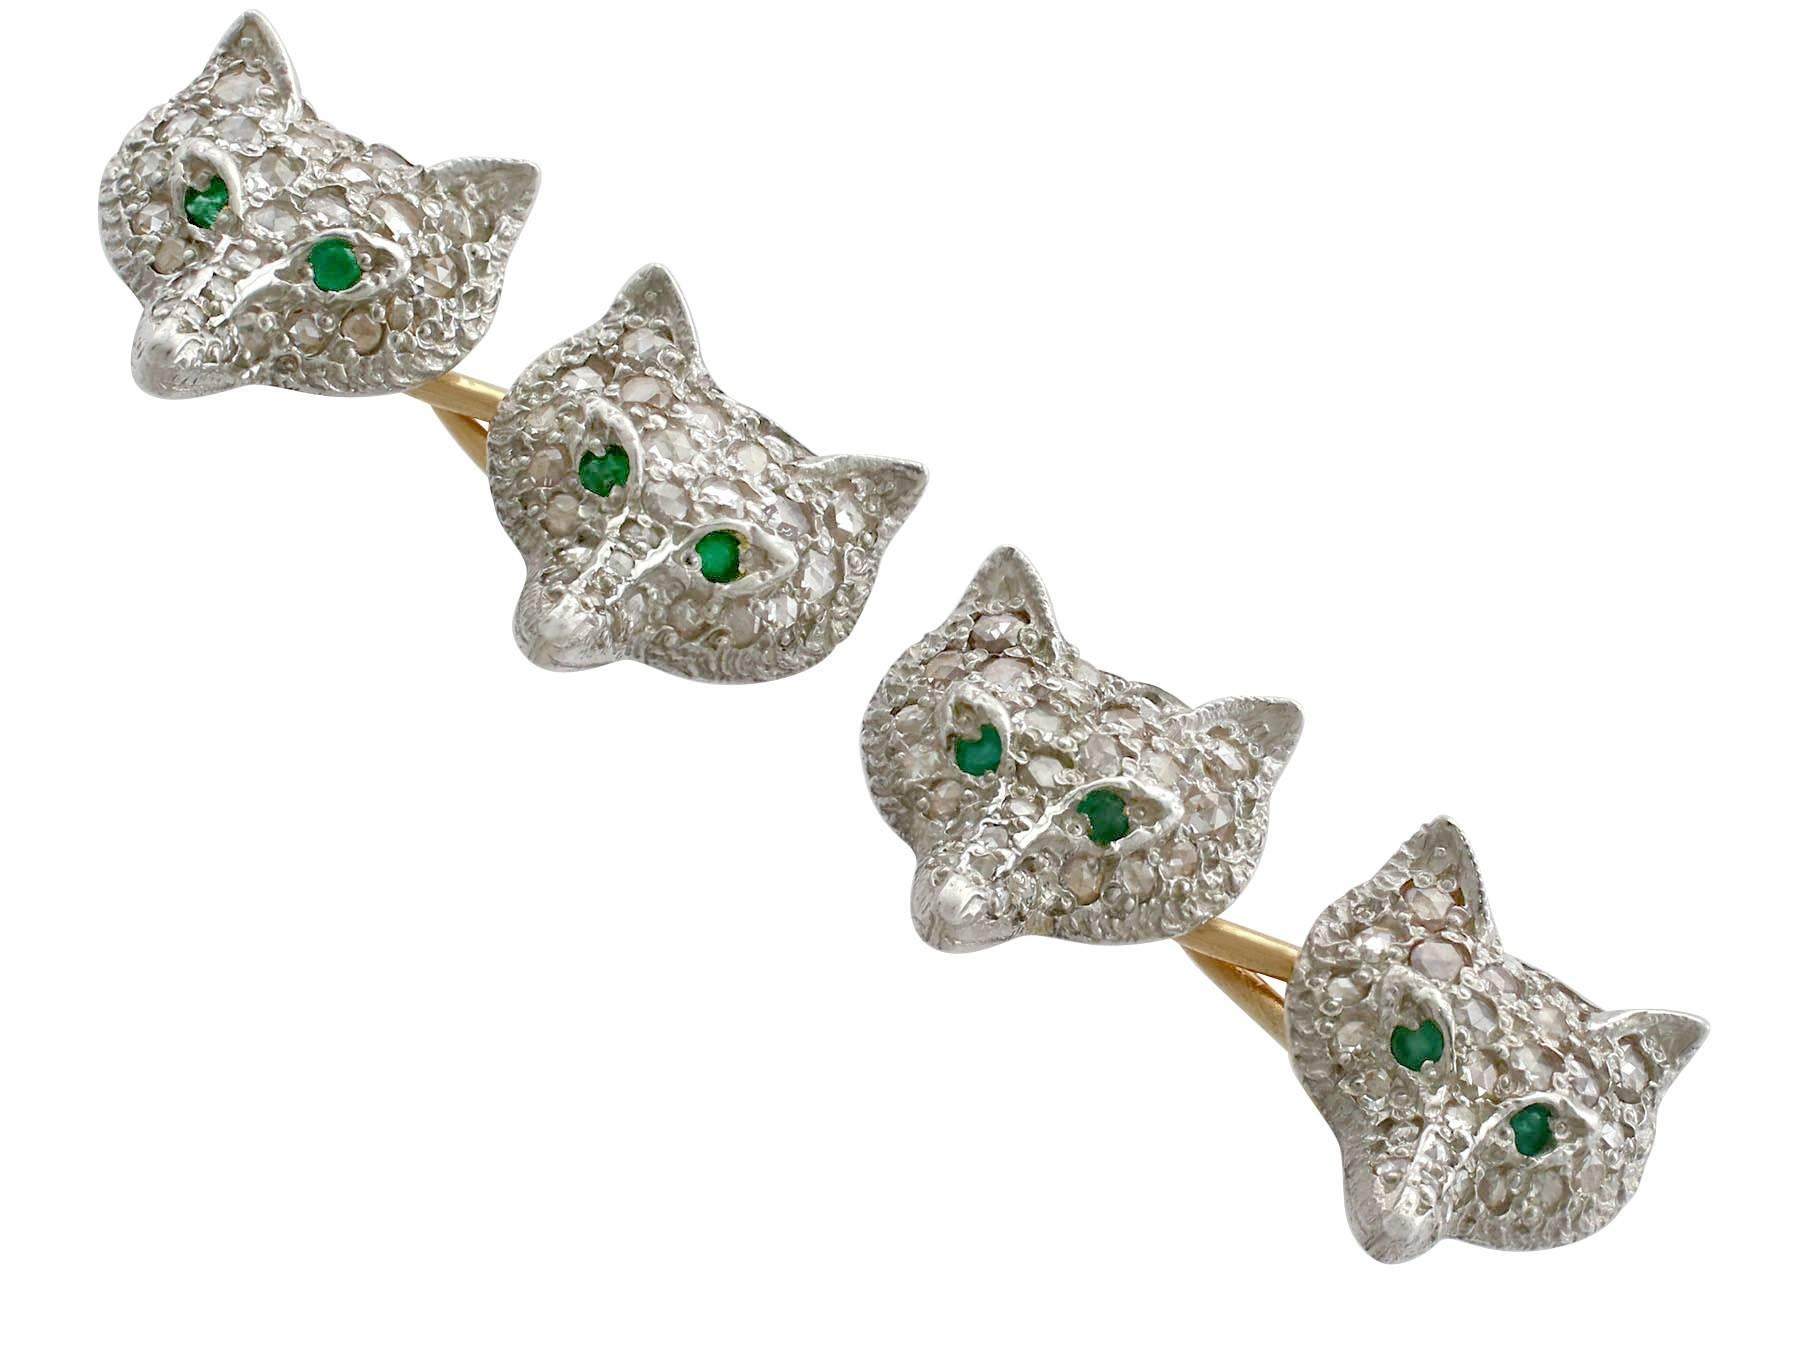 An impressive pair of contemporary 0.58 carat diamond and 0.08 carat emerald, silver gilt 'fox head' cufflinks; part of our diverse men's jewellery collections.

These fine and impressive fox head cufflinks have been crafted in silver.

Each link